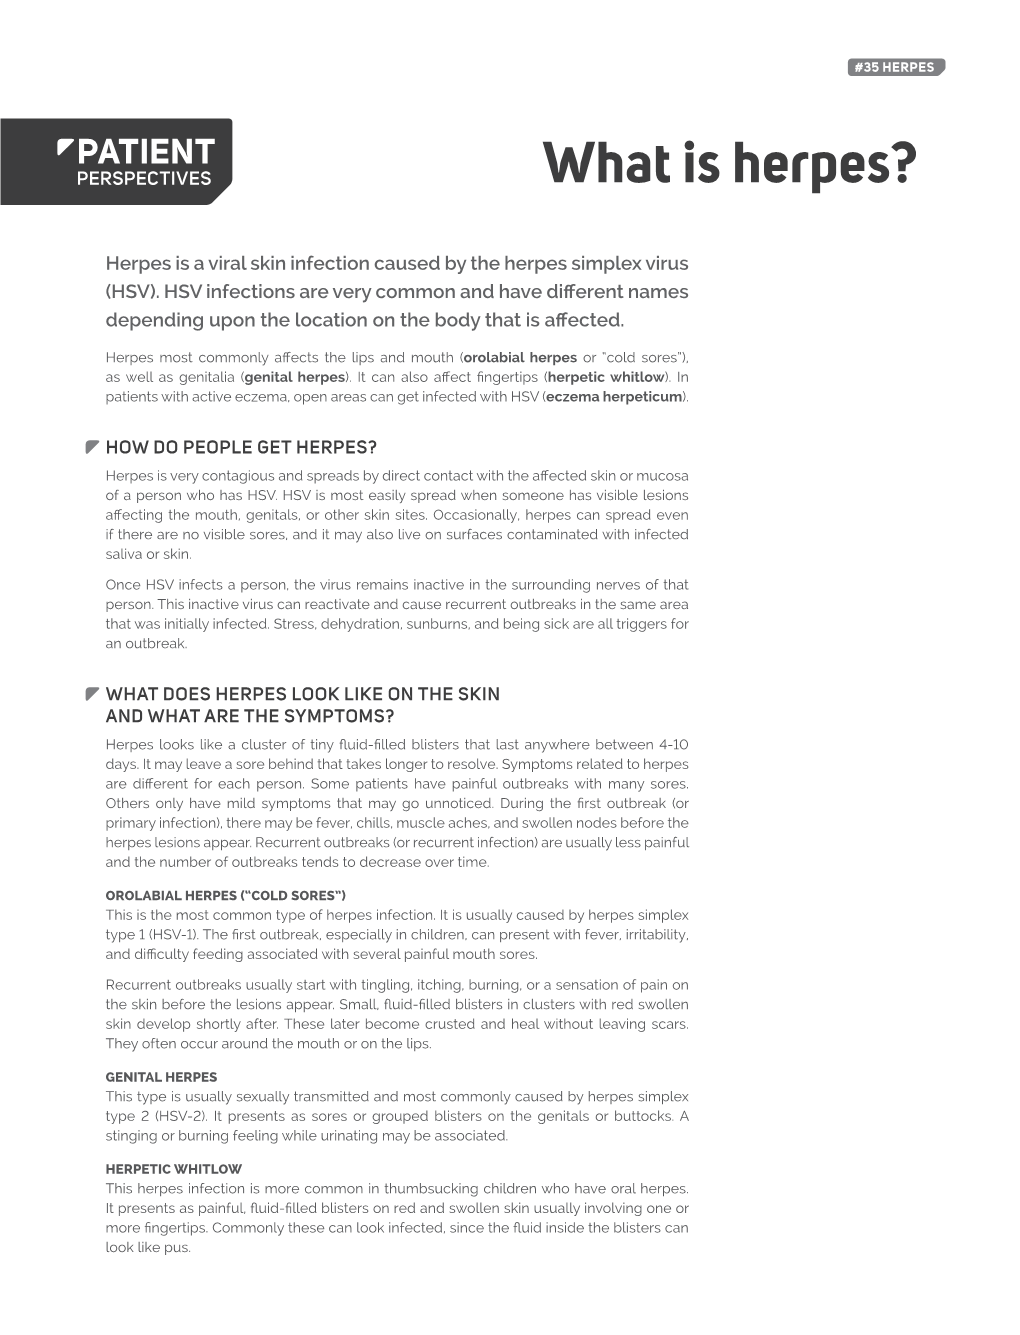 What Is Herpes?